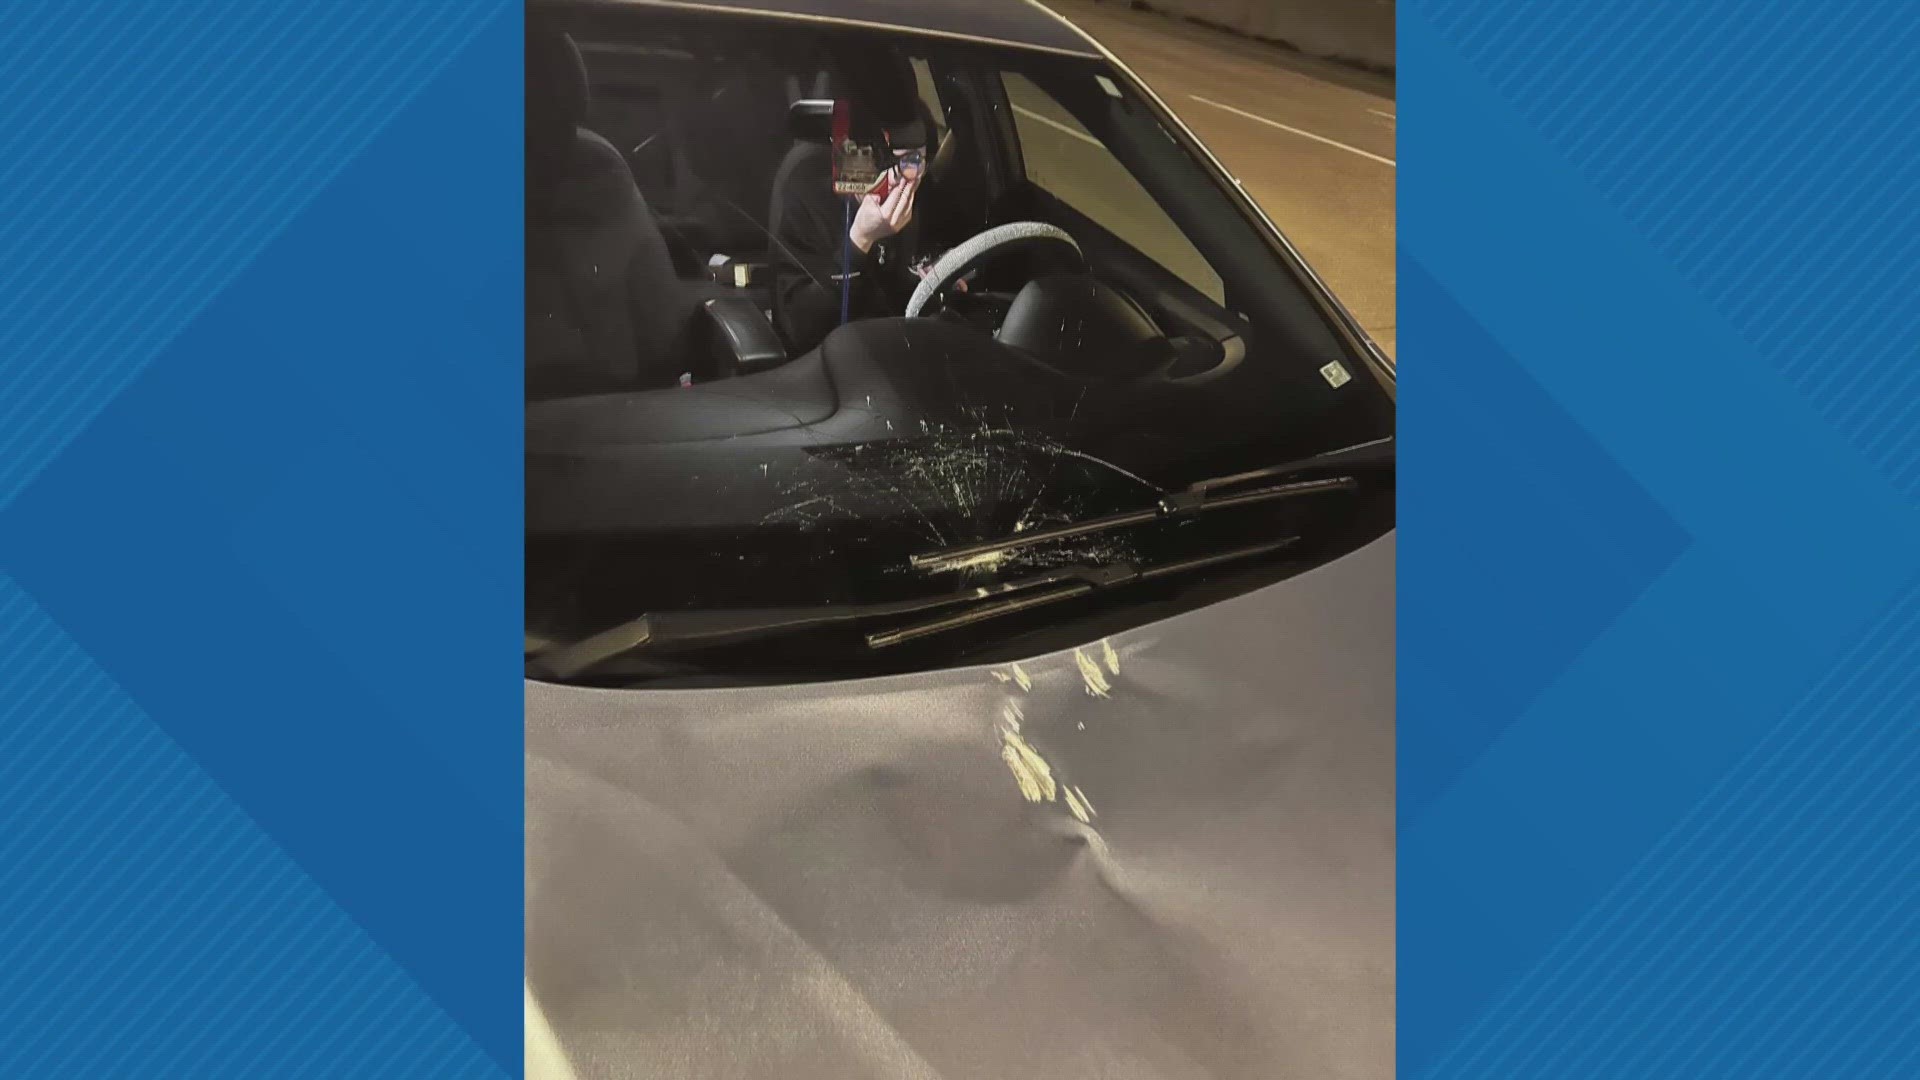 Police said Saturday a 37-year-old man had been brought in Friday for questioning regarding the incidents. He admitted to throwing the rocks at cars.